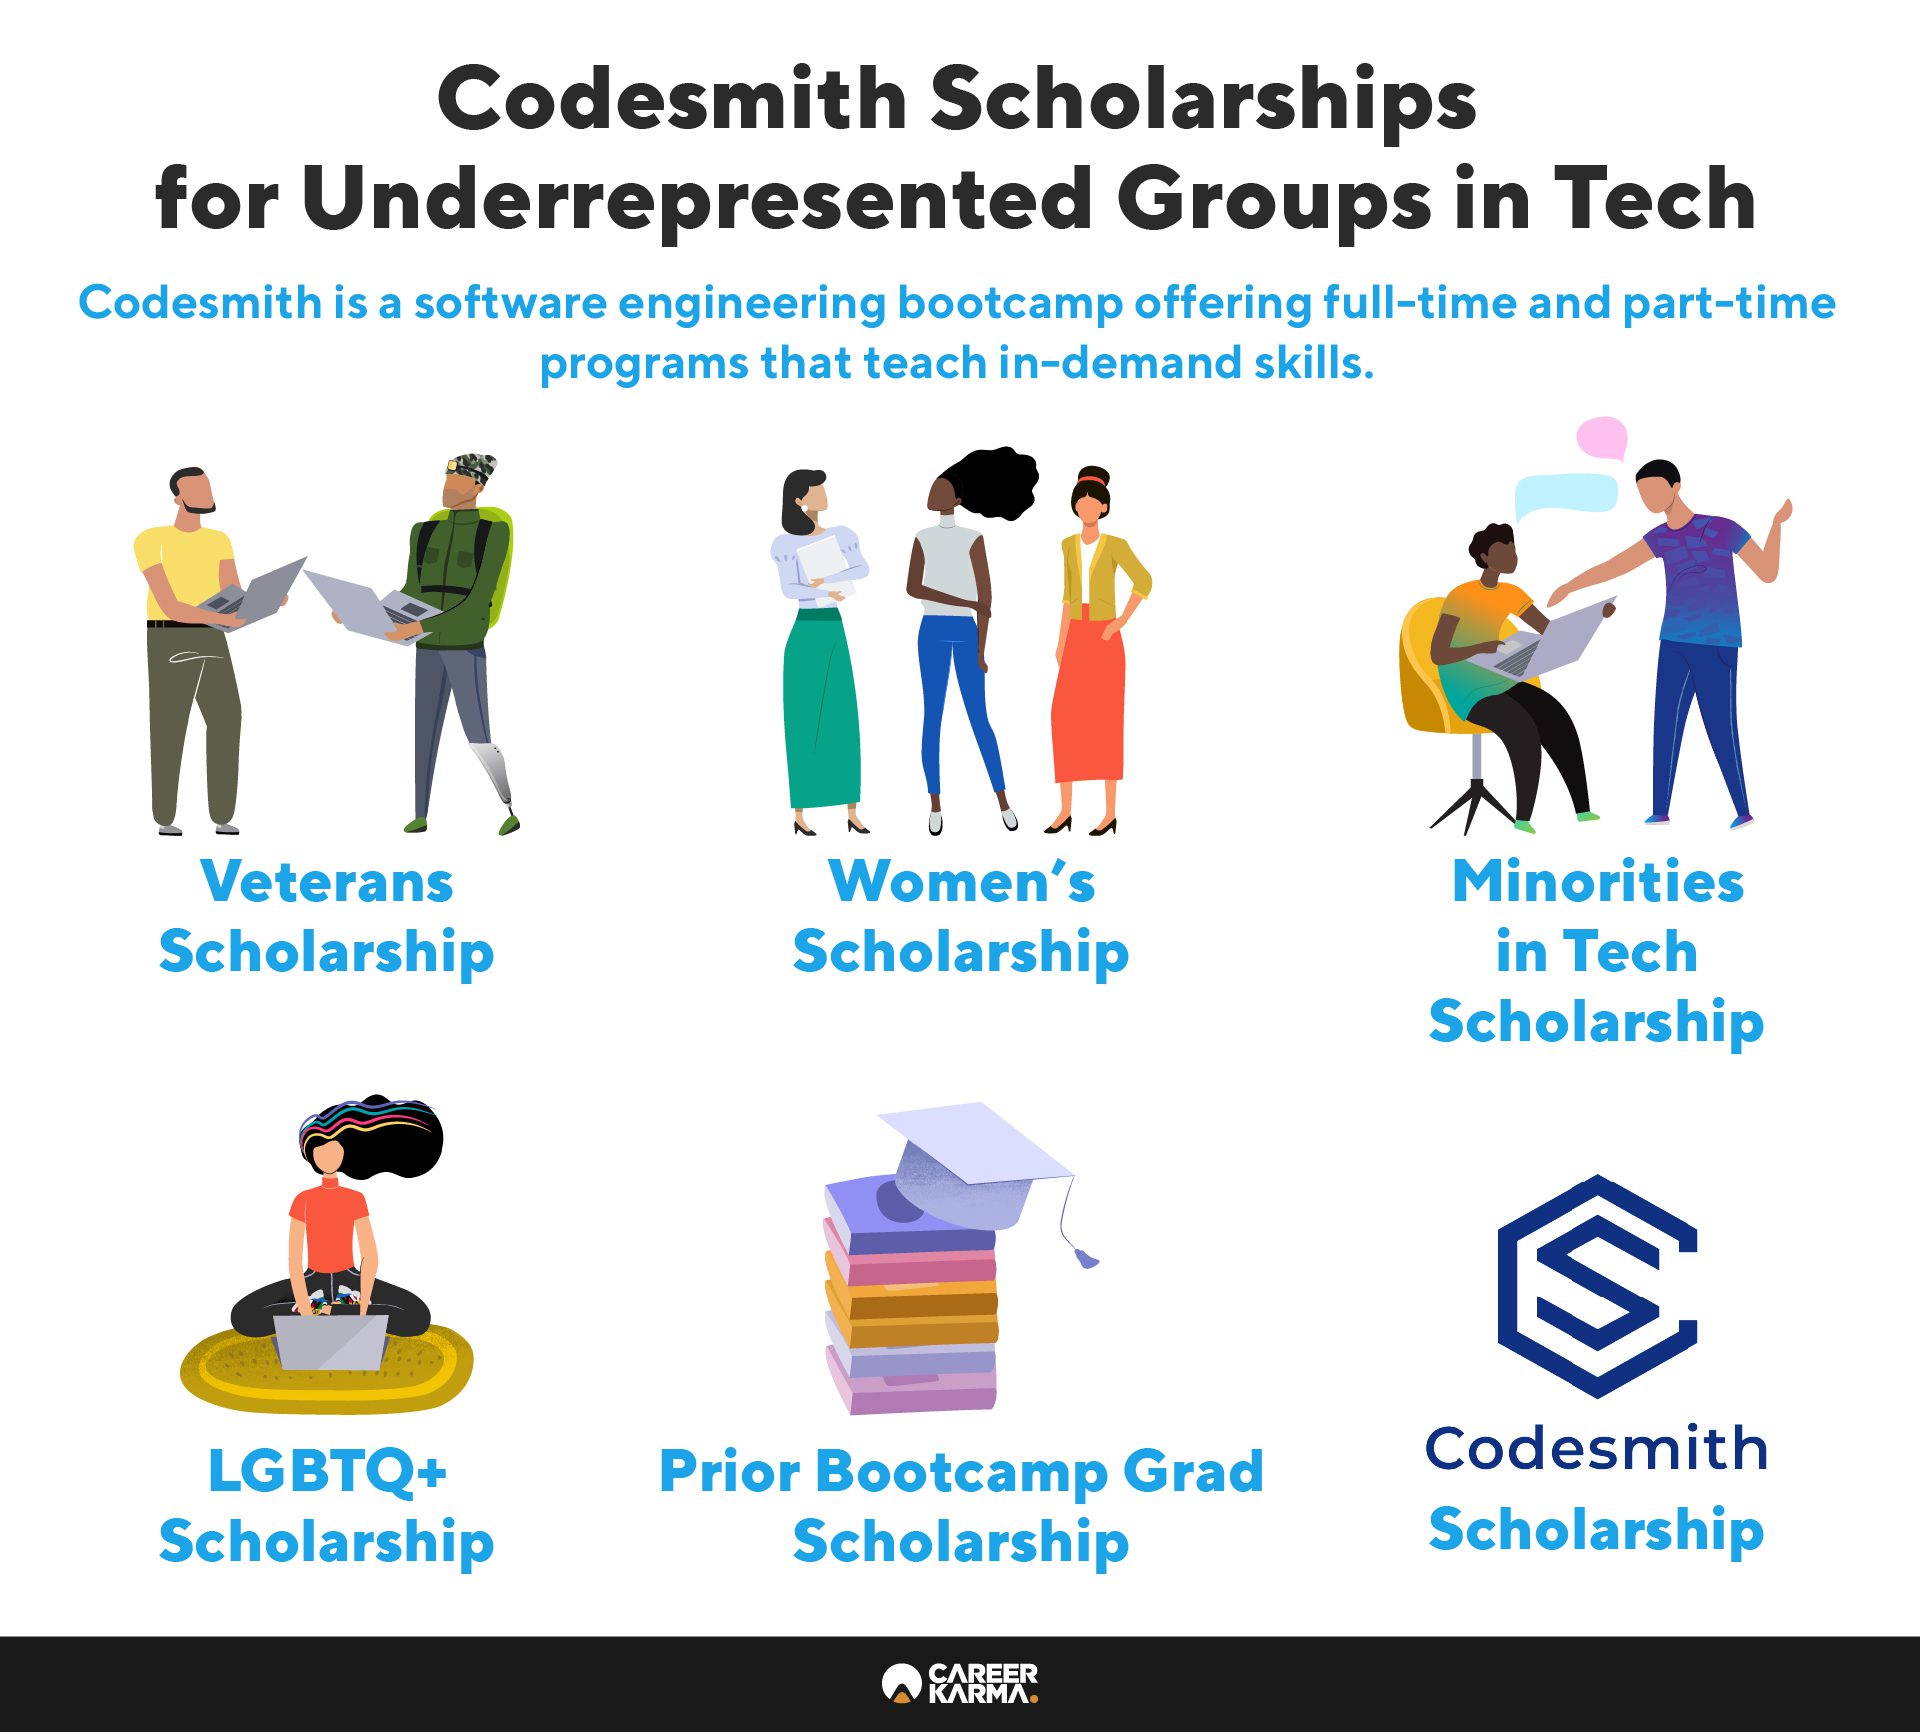 Infographic features the various scholarships offered by Codesmith.